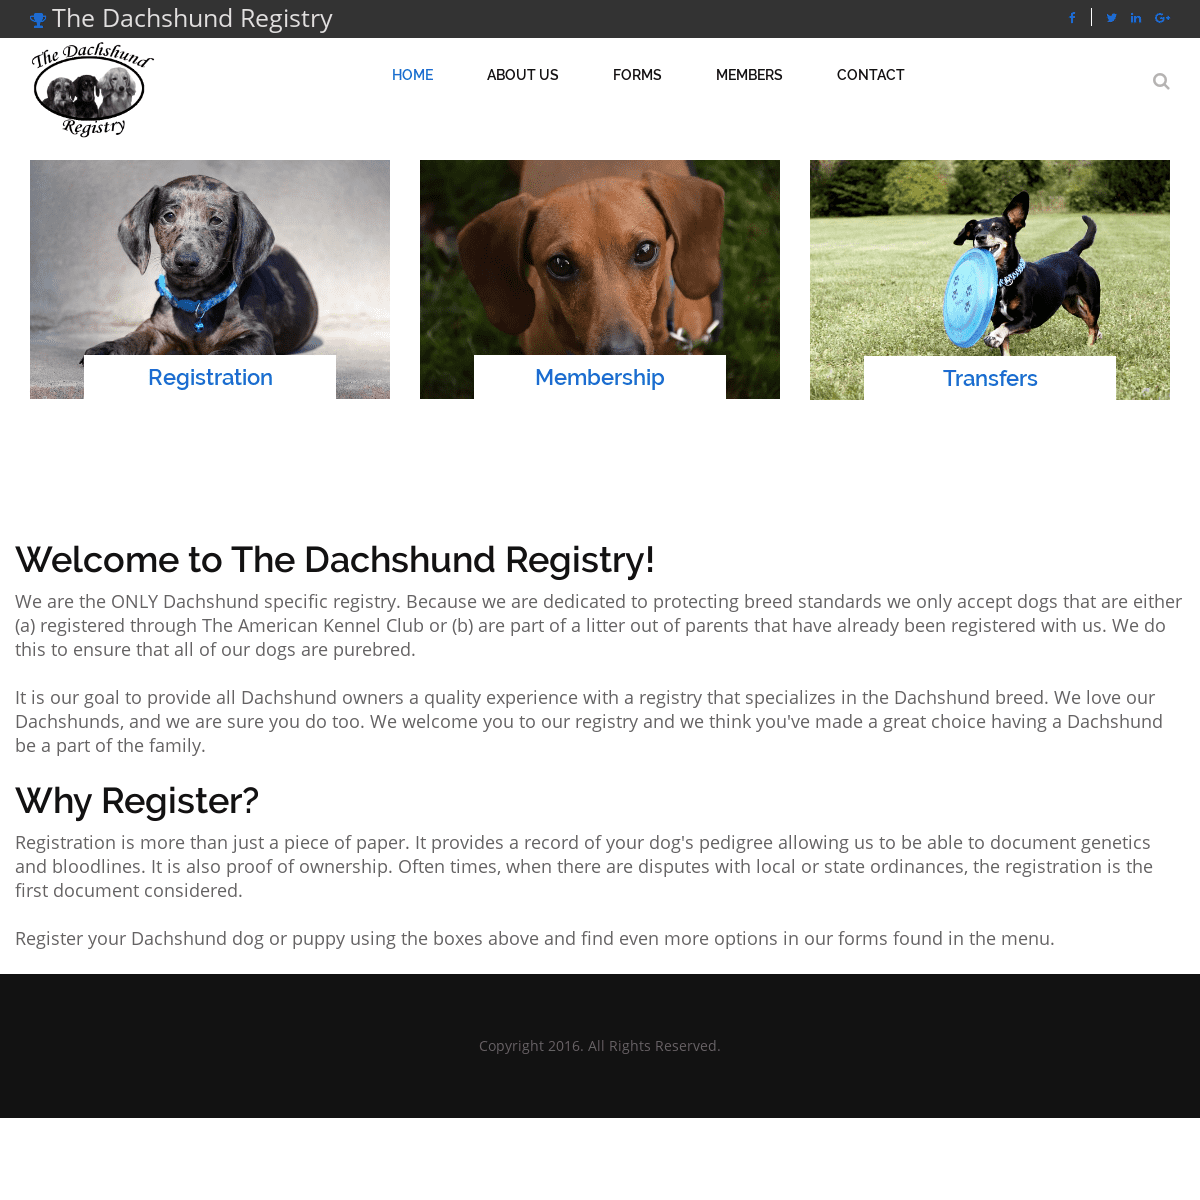 A complete backup of dachshundregistry.com